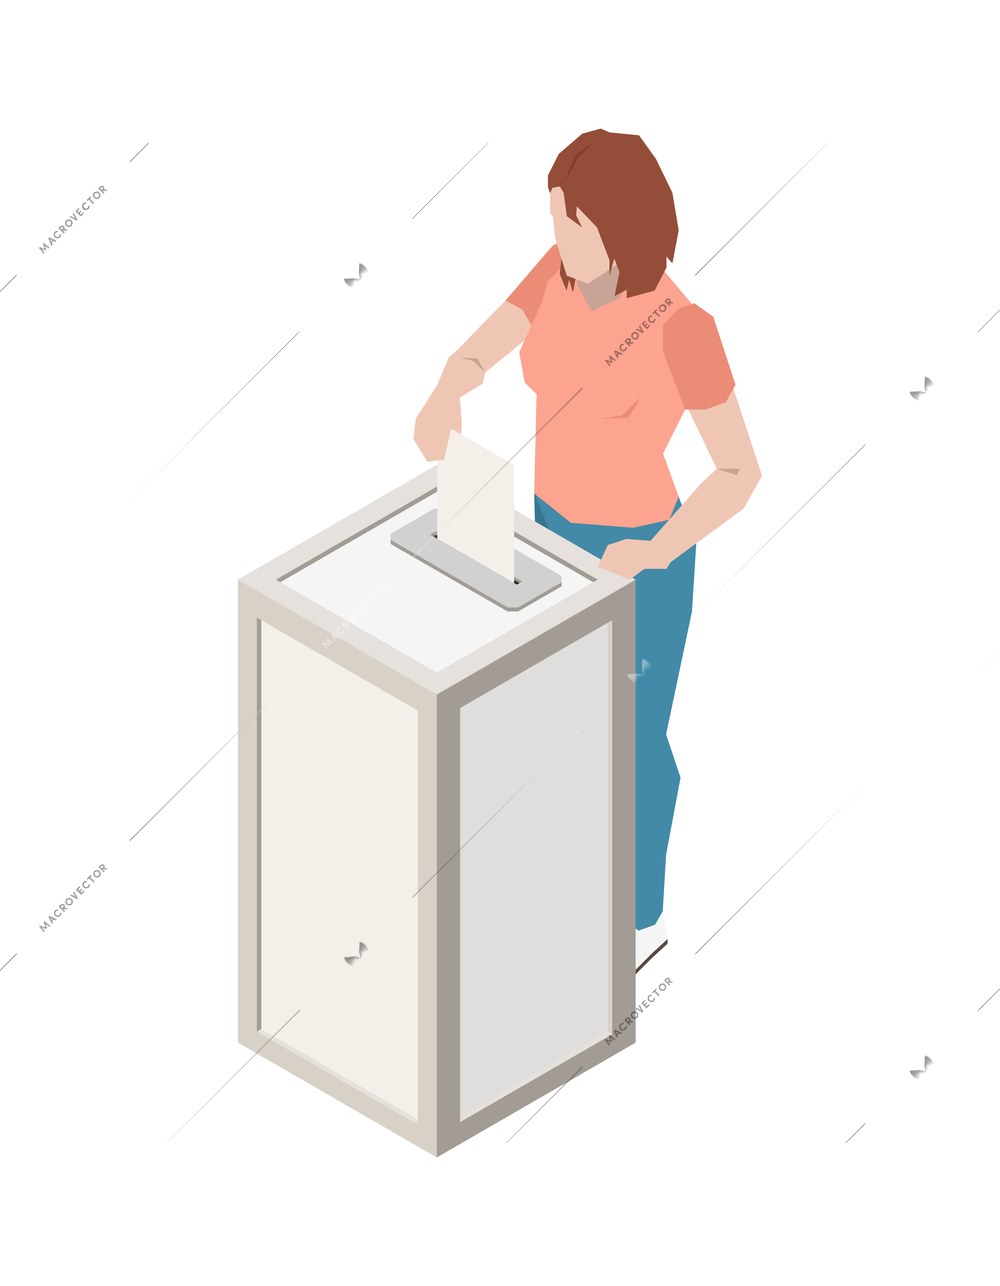 Isometric voting icon with faceless female character putting ballot into election box 3d vector illustration